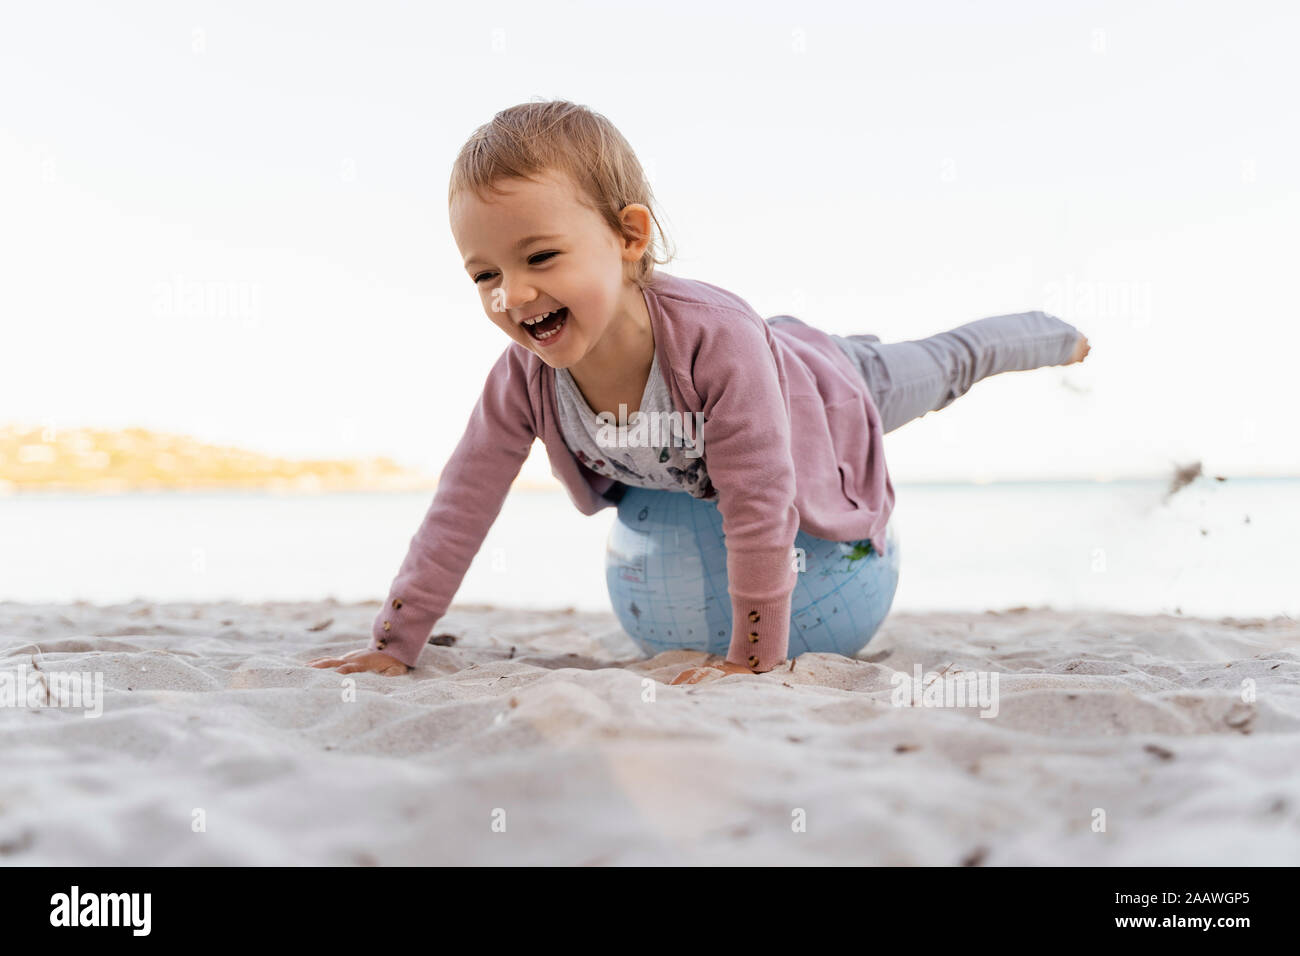 Portrait of laughing little girl balancing on  Earth beach ball Stock Photo